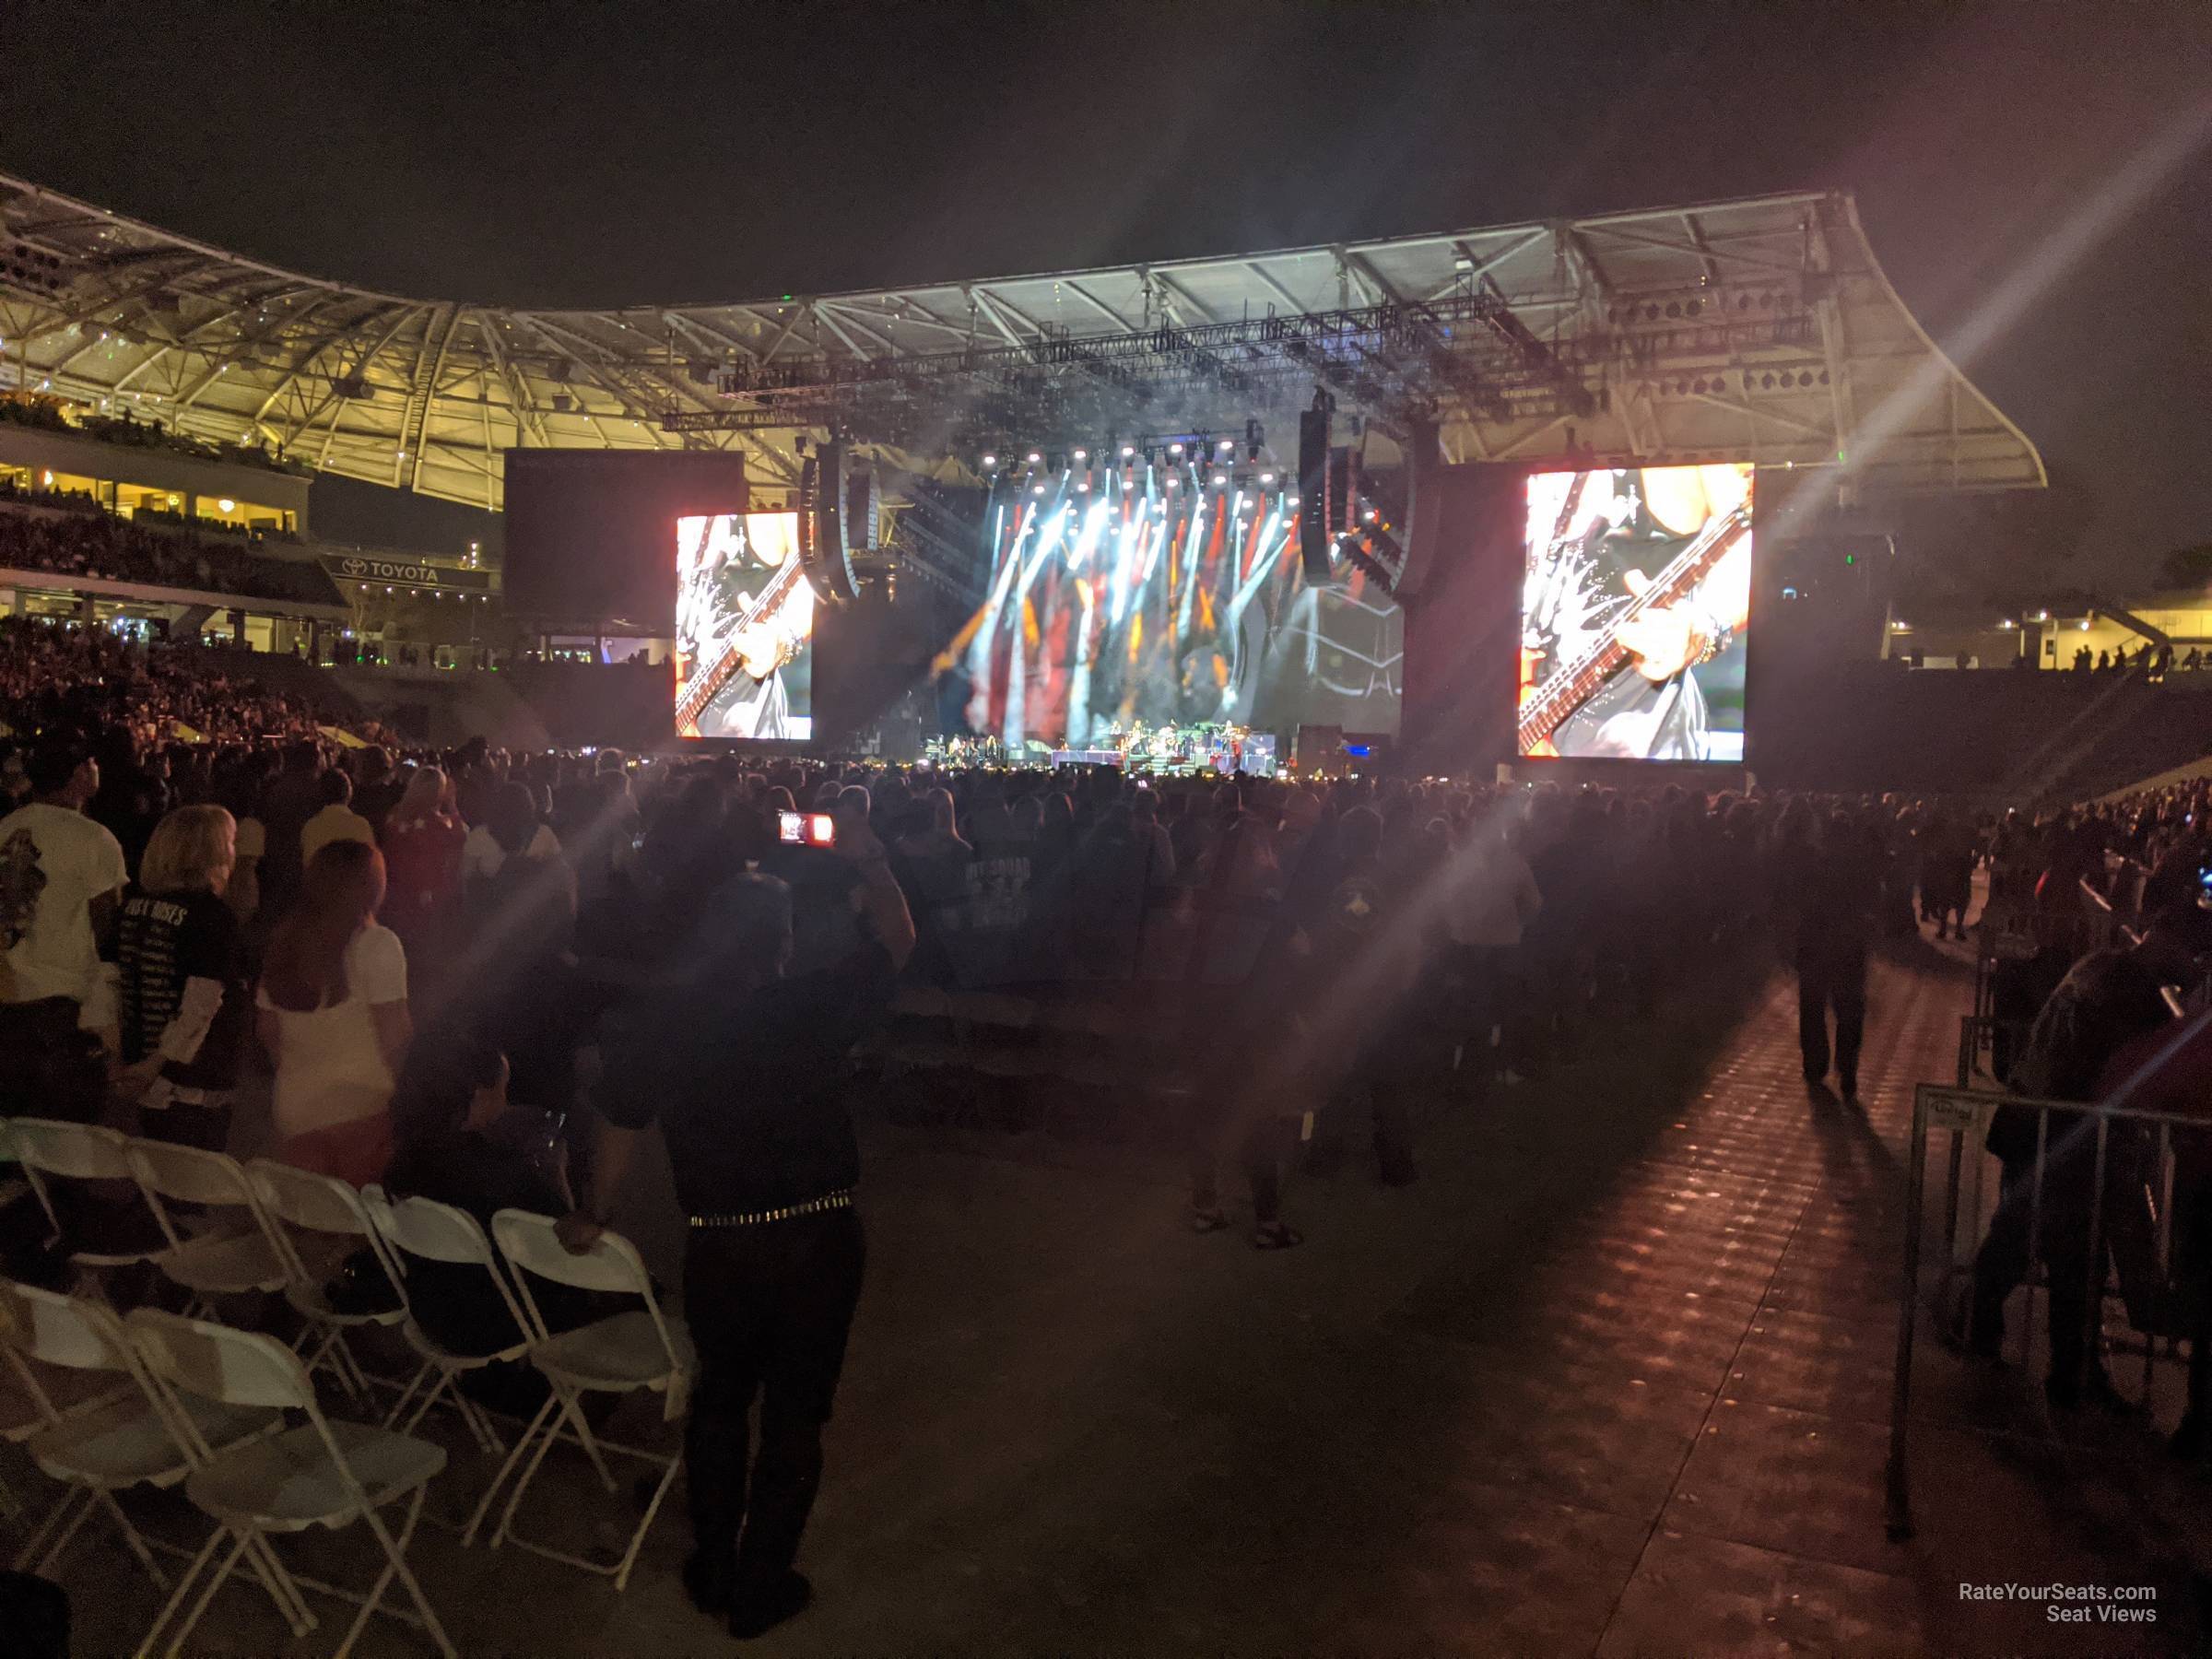 section 116, row a seat view  for concert - bmo stadium